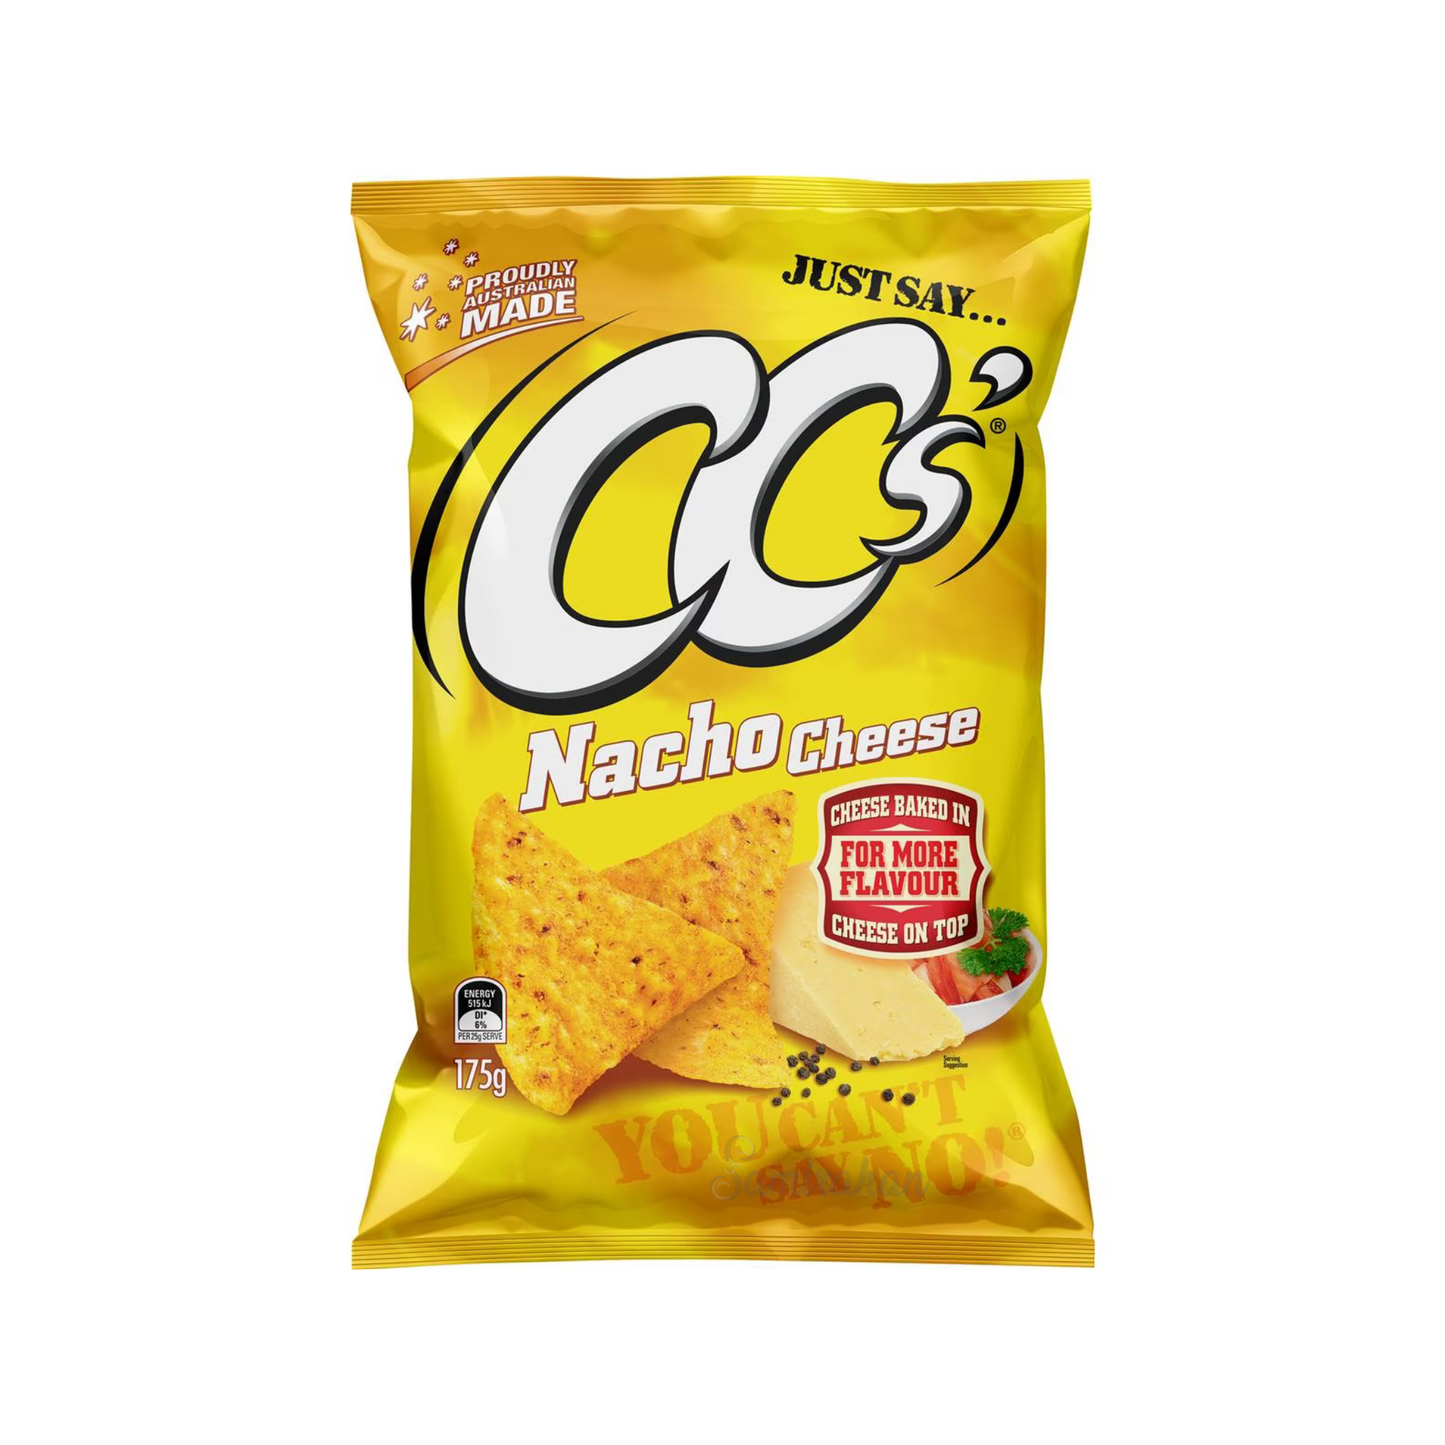 CC's Corn Chips Tasty Cheese are Australia's original corn chip - made with real Aussie ground corn & topped with a very moreish cheesy nacho seasoning. Real cheese baked in. A healthy alternative to snacks. Halal suitable. Gluten free. Best genuine foreign Aussie delicious healthy snacks nachos in Dhaka Bangladesh.